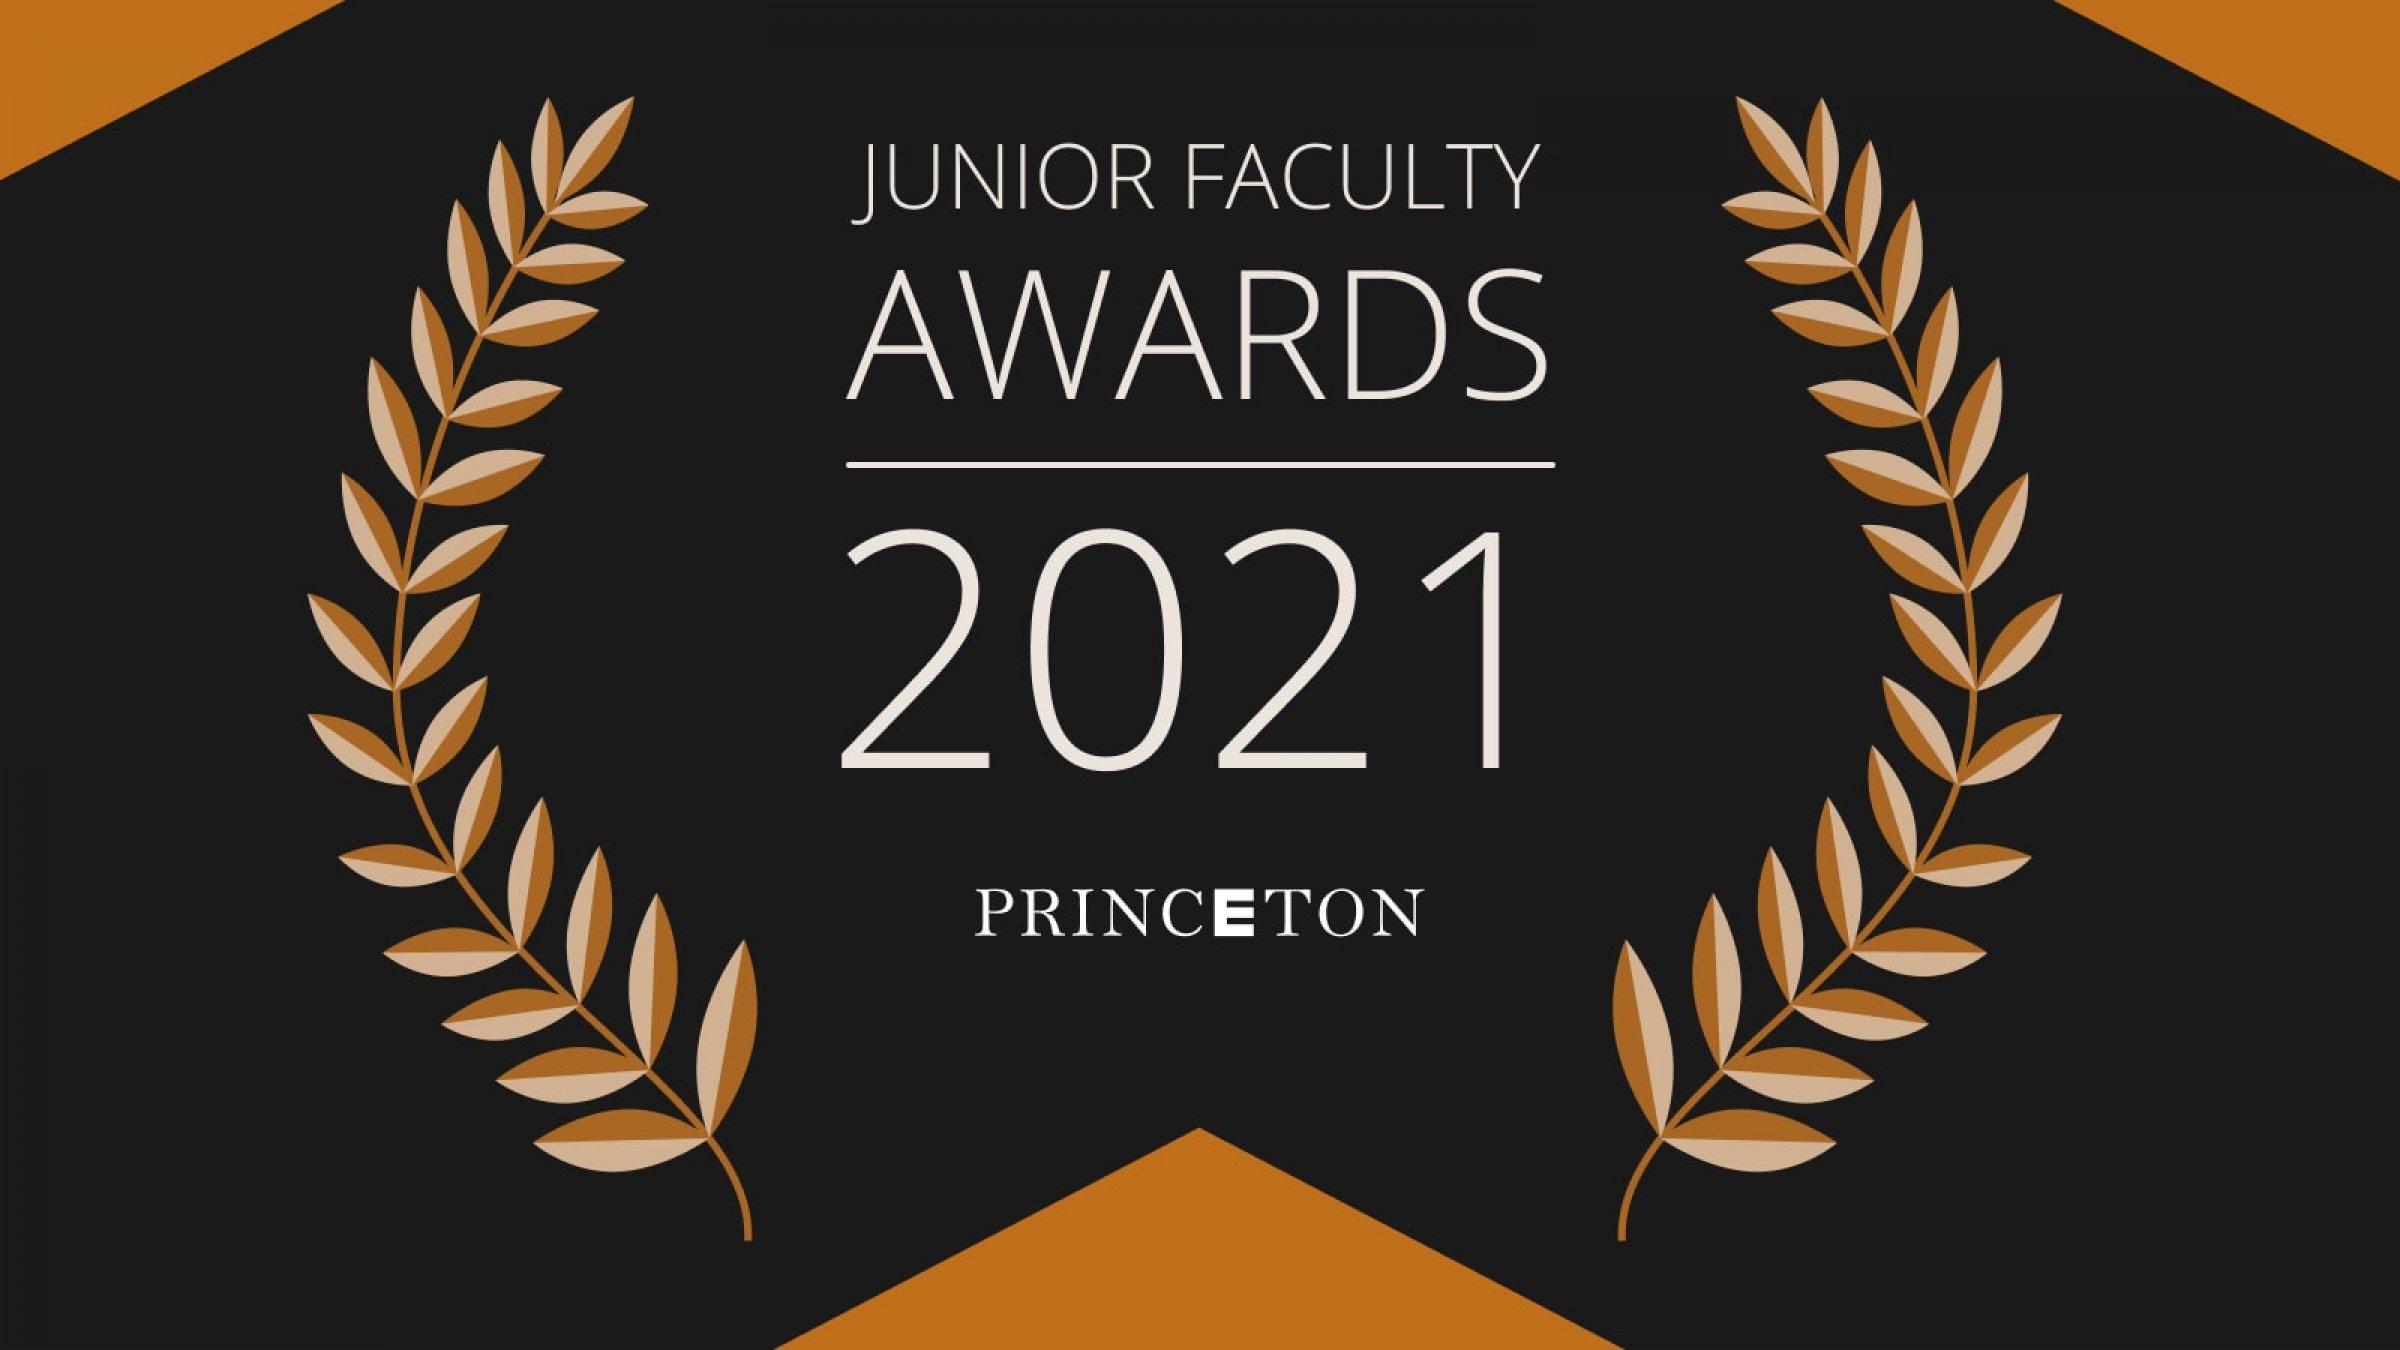 Orange and black graphic with two olive branches around text that reads, Junior faculty awards, 2021, Princeton.